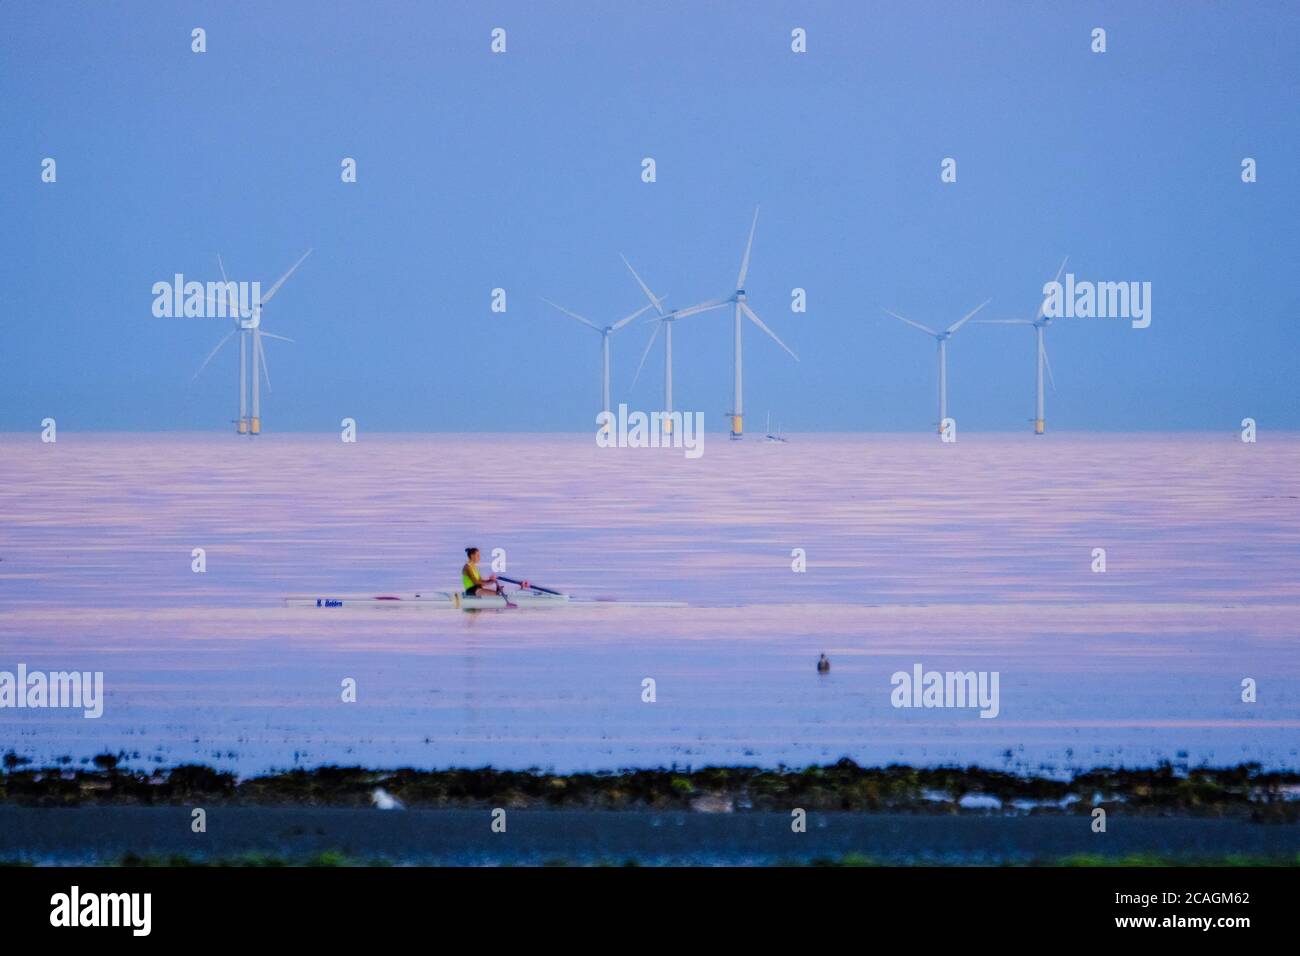 Worthing Beach, Worthing, UK. 6th Aug, 2020. A rower traverses the calm sea as the sun sets casting a warm glow on a warm summer evening. Rampion Wind Farm can be seen in the background, 13km-16km off shore. Picture by Credit: Julie Edwards/Alamy Live News Stock Photo